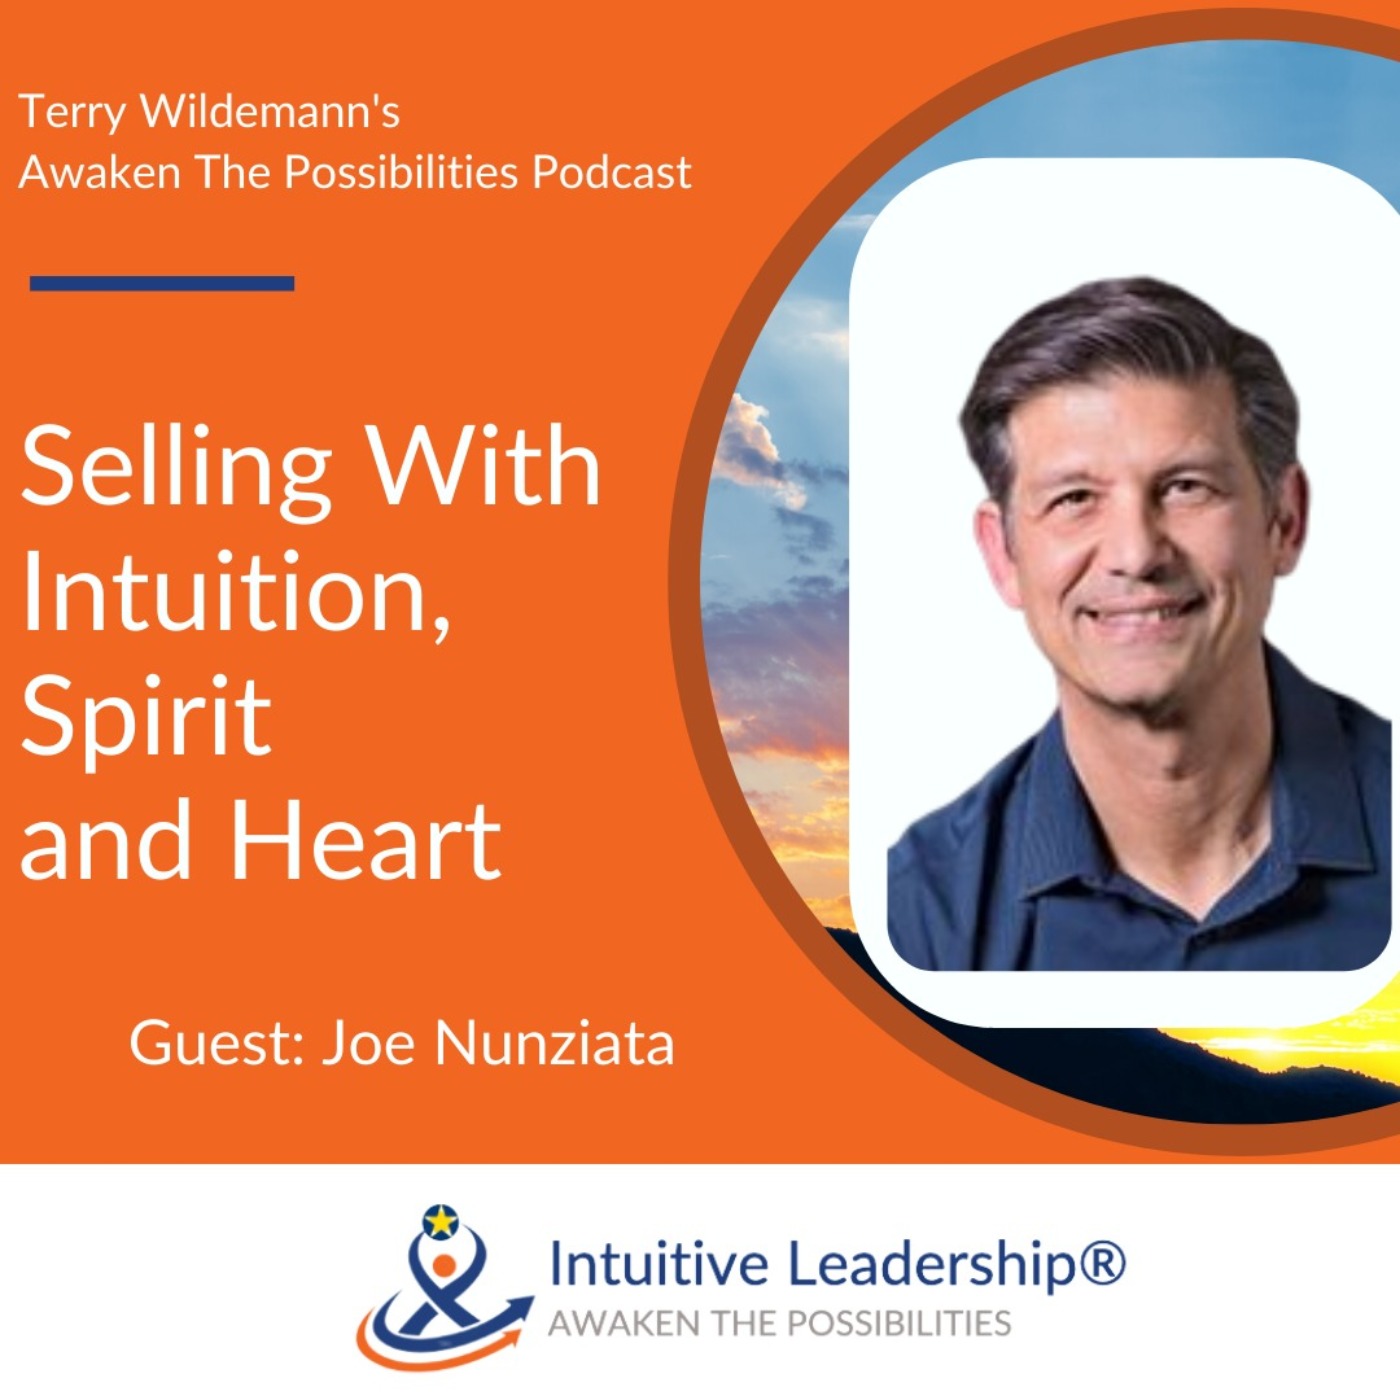 Selling With Intuition, Spirit and Heart